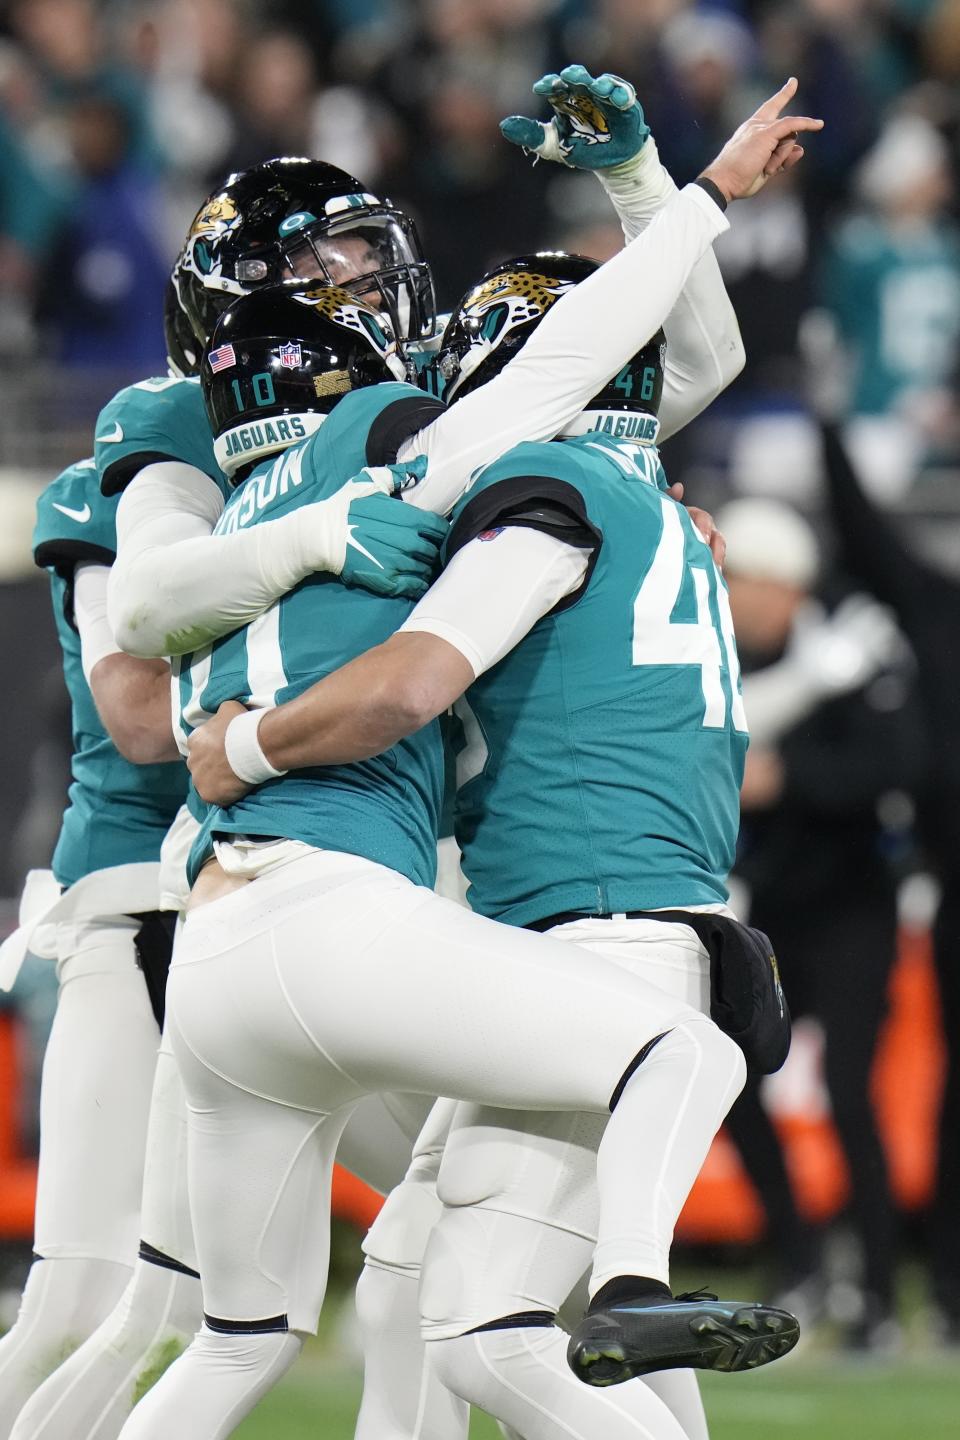 Teammates embrace Jacksonville Jaguars place kicker Riley Patterson (10) after he kicked the game-winning field goal against the Los Angeles Chargers during the second half of an NFL wild-card football game, Saturday, Jan. 14, 2023, in Jacksonville, Fla. Jacksonville Jaguars won 31-30. (AP Photo/Chris O'Meara)